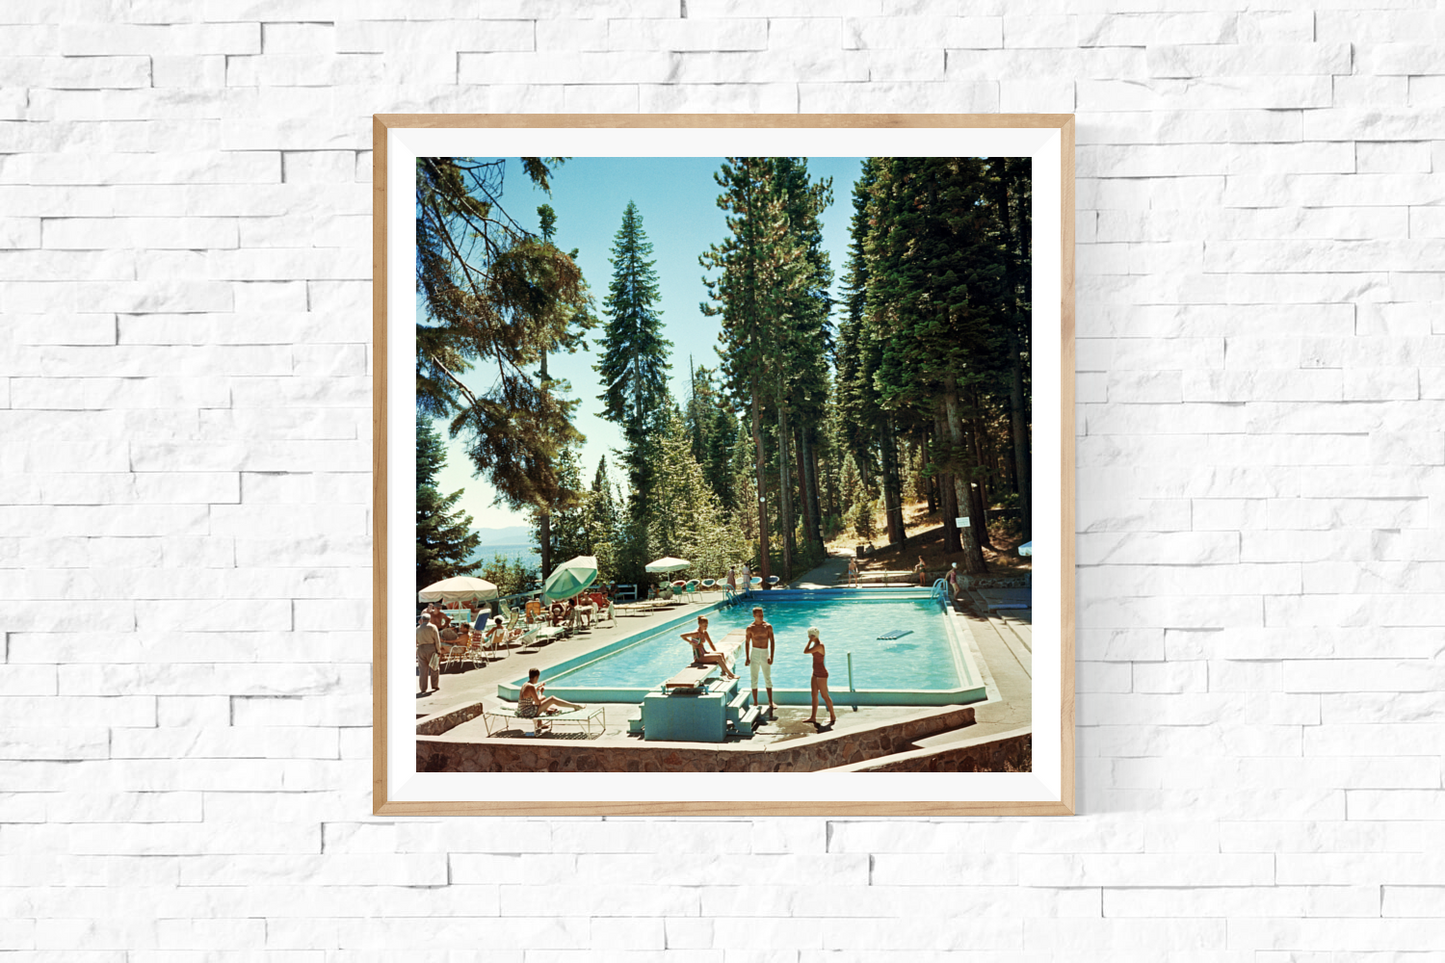 Framed Slim Aarons: Pool at Lake Tahoe photo for sale Getty Images Gallery